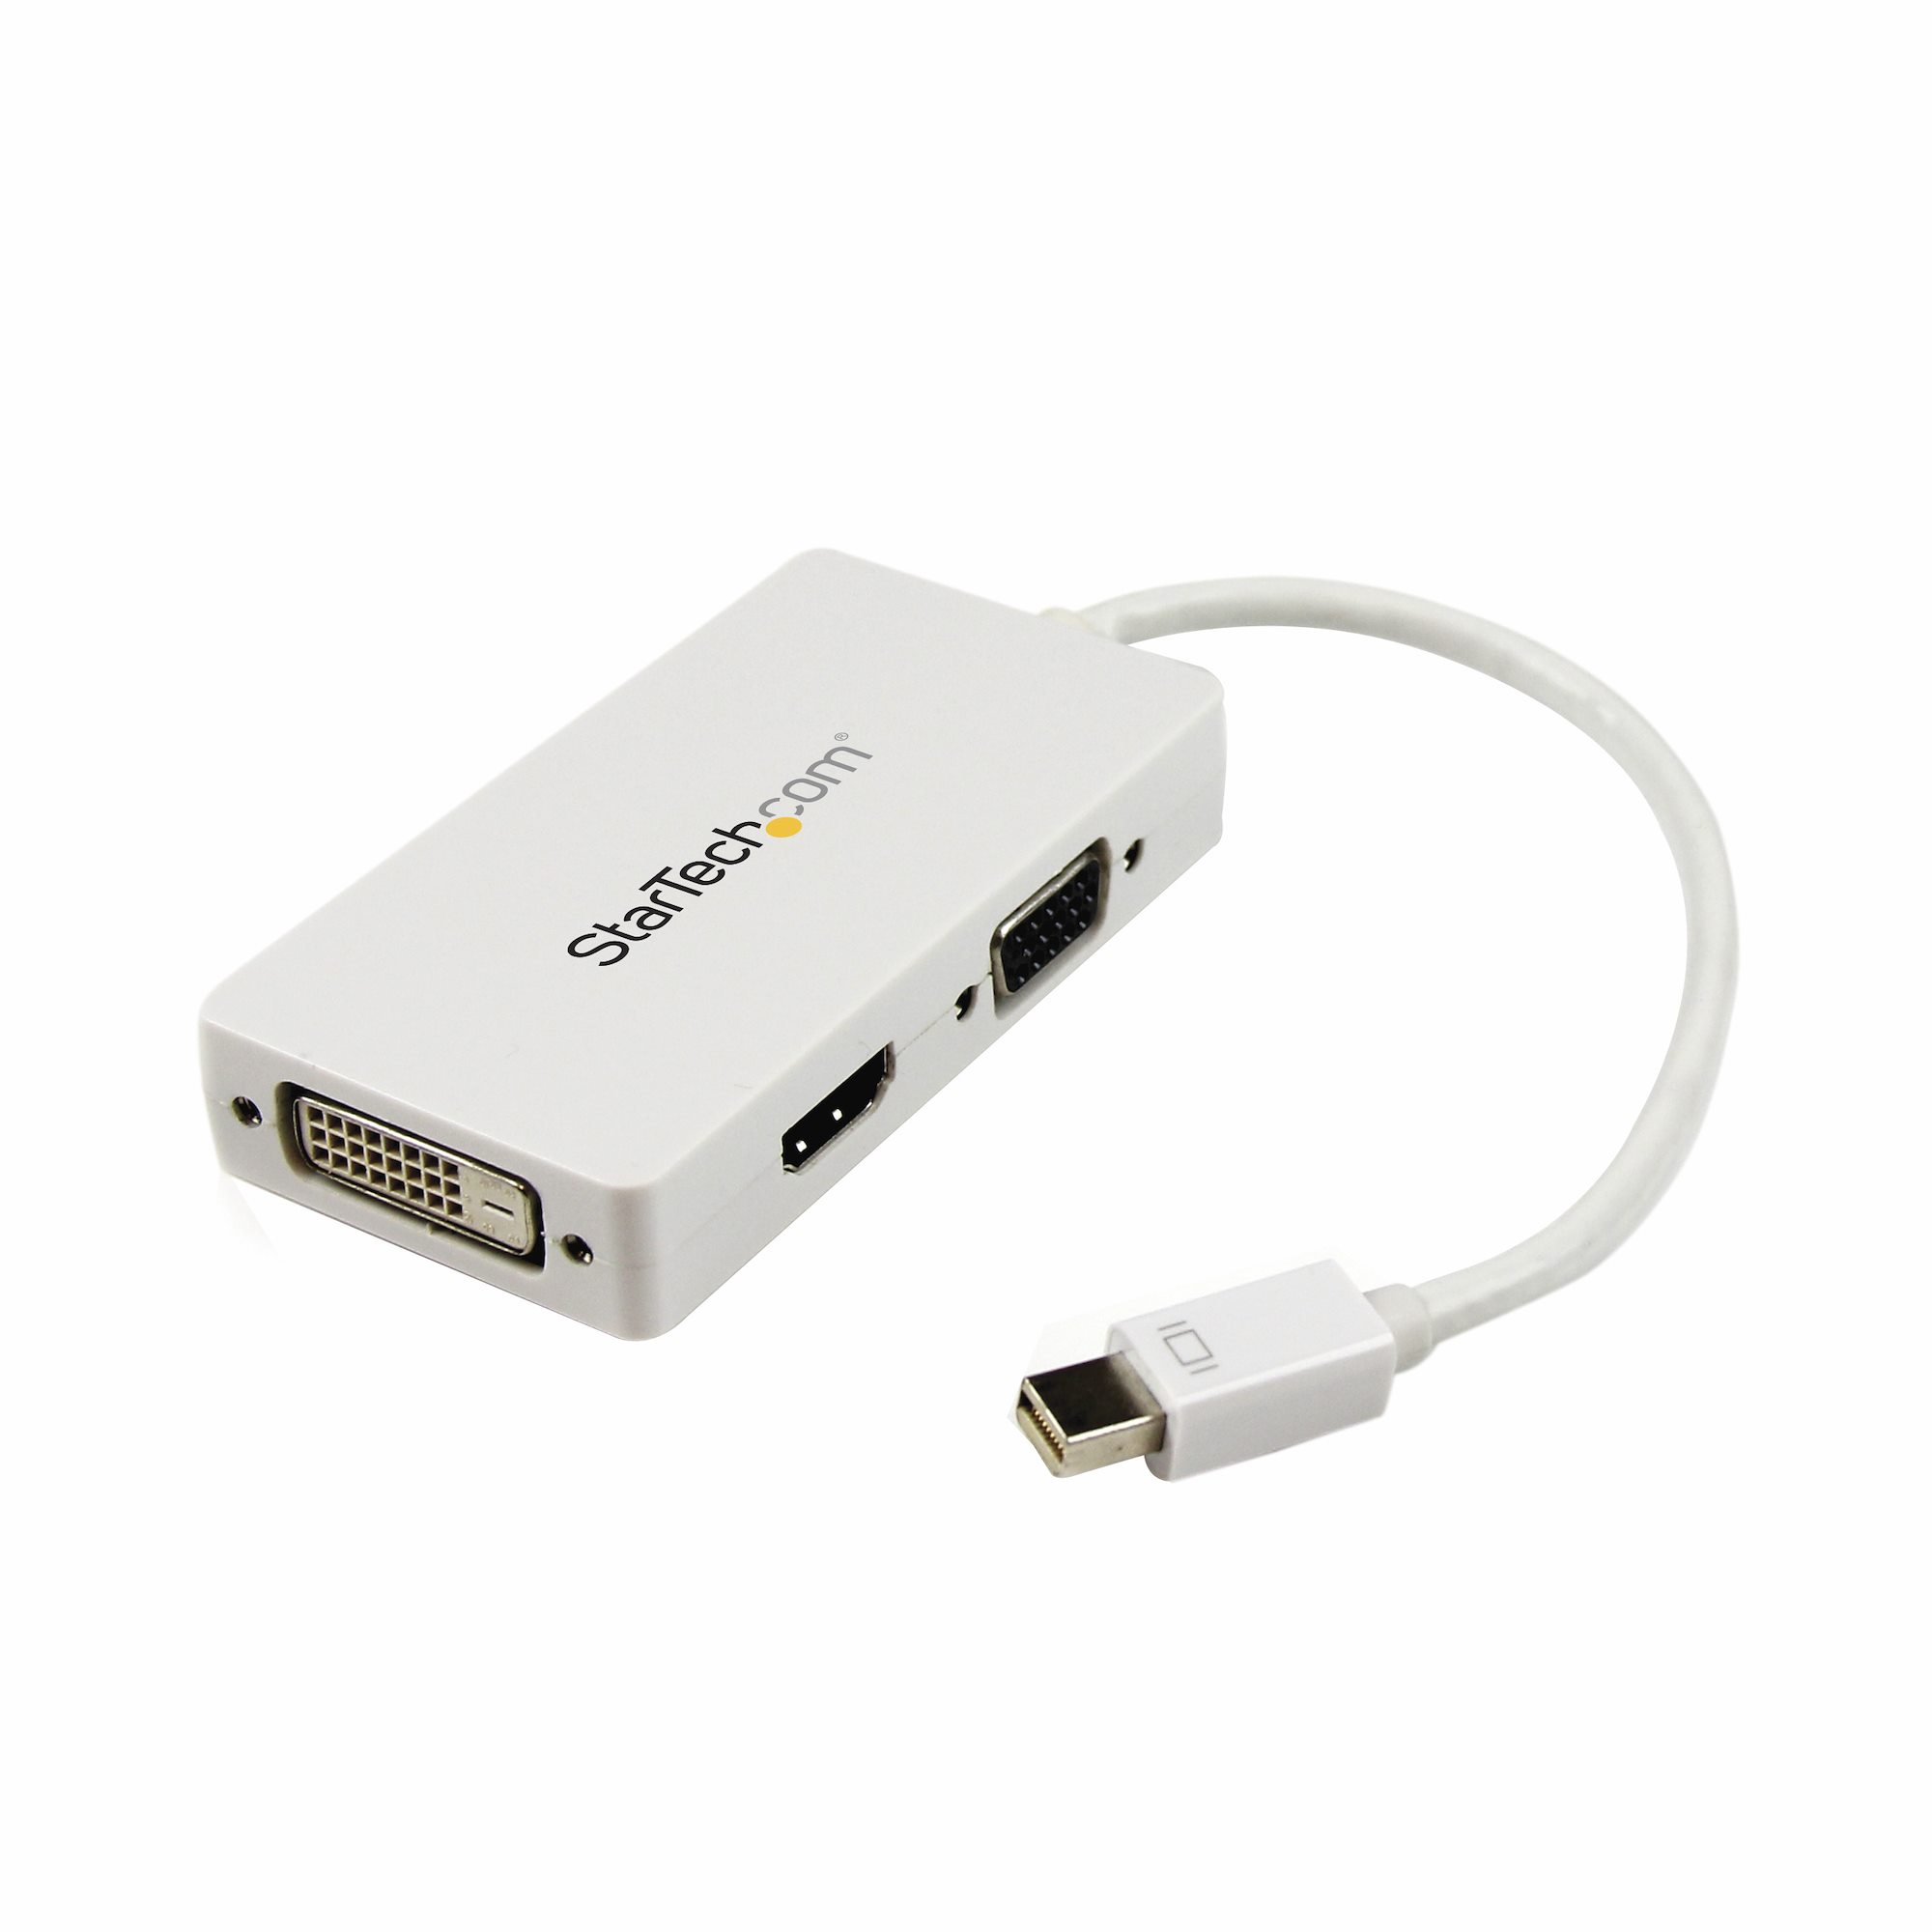 3In1Mini Display Port DP Thunderbolt to HDMI DVI VGA Adapter Cable For MacBook E 